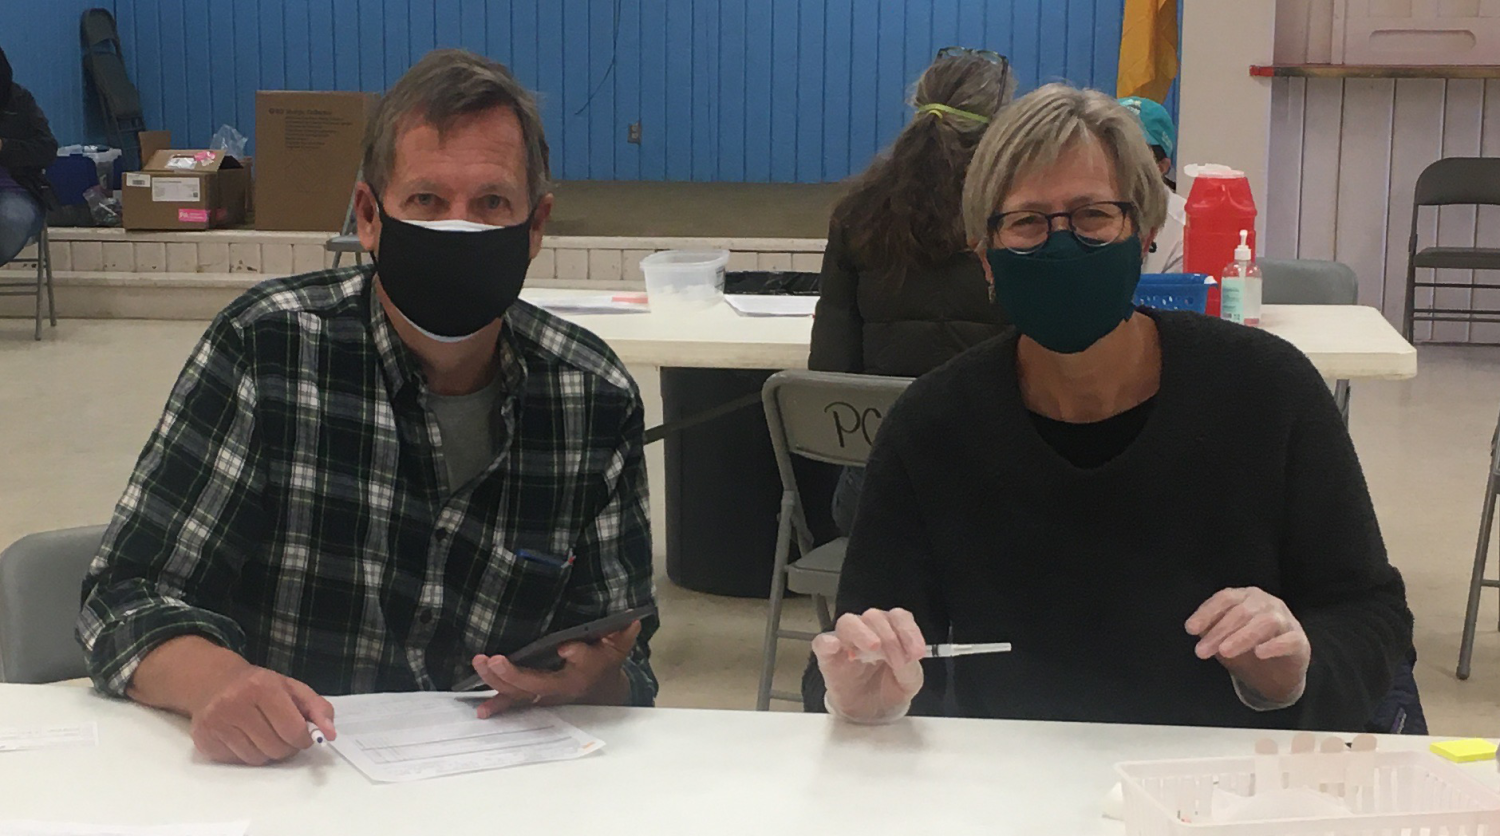 When the COVID-19 pandemic delayed their assignment in Peru, Lisa and Peter Waugh dedicated their time to providing vaccinations in rural New Mexico. 